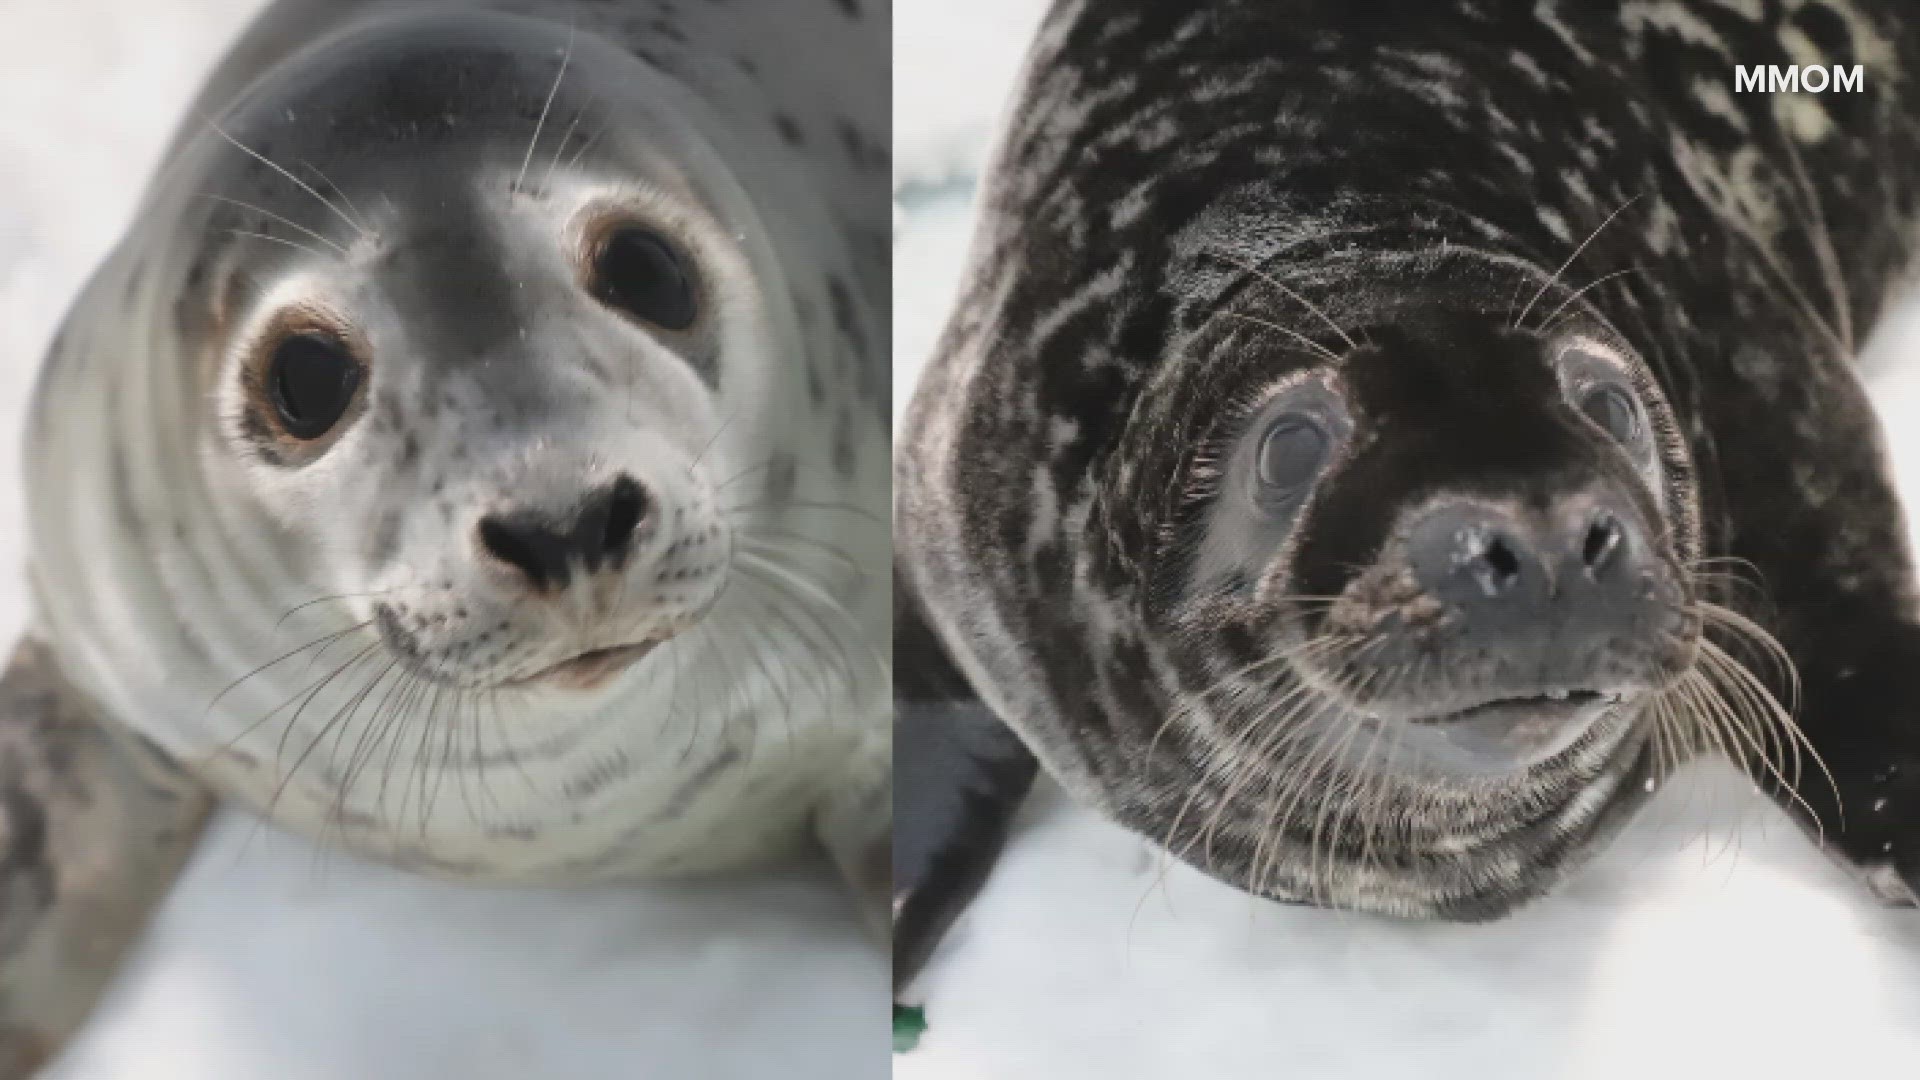 A plow truck driver discovered one of the seals wandering in the road during a storm in January. The other was stranded near the same neighborhood.